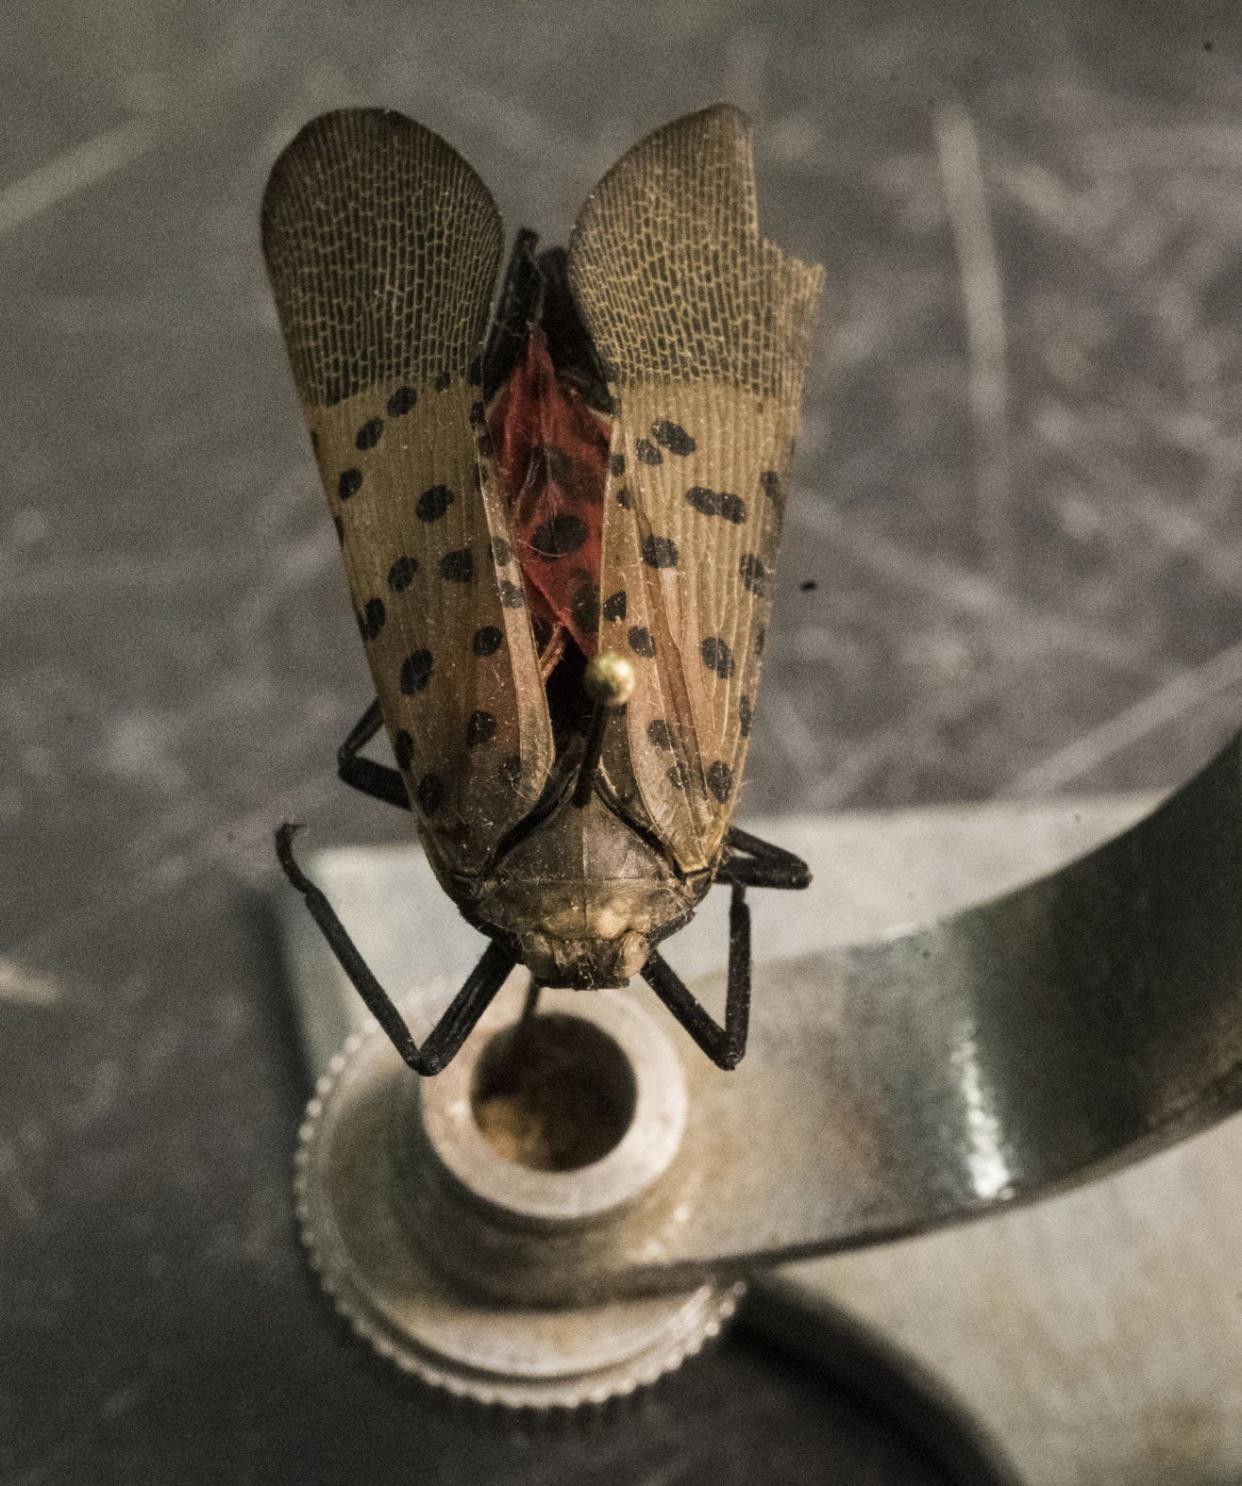 This is an adult spotted lanternfly that was sent to Howard Russell, an entomologist at Michigan State University in Lansing. Spotted lanternflies, native to southeast Asia, are making their way across the East Coast, feasting on the insides of trees, carpeting infested forests in sticky secretions and threatening multi-million dollar agriculture and forestry industries